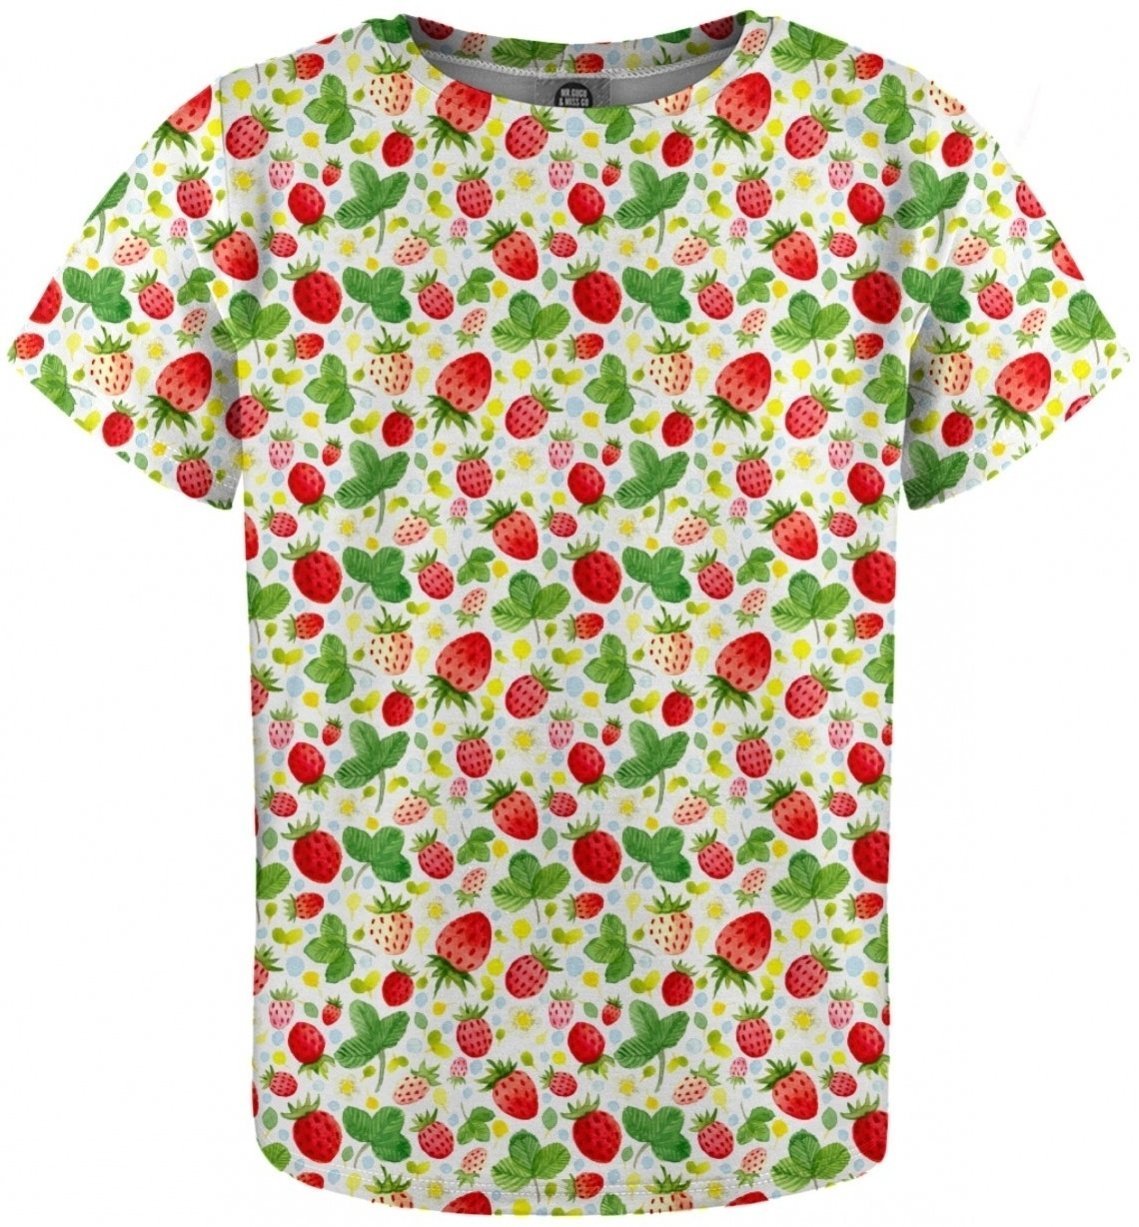 T-Shirt Mr. Gugu and Miss Go T-Shirt Strawberries Pattern 10 - 12 Y